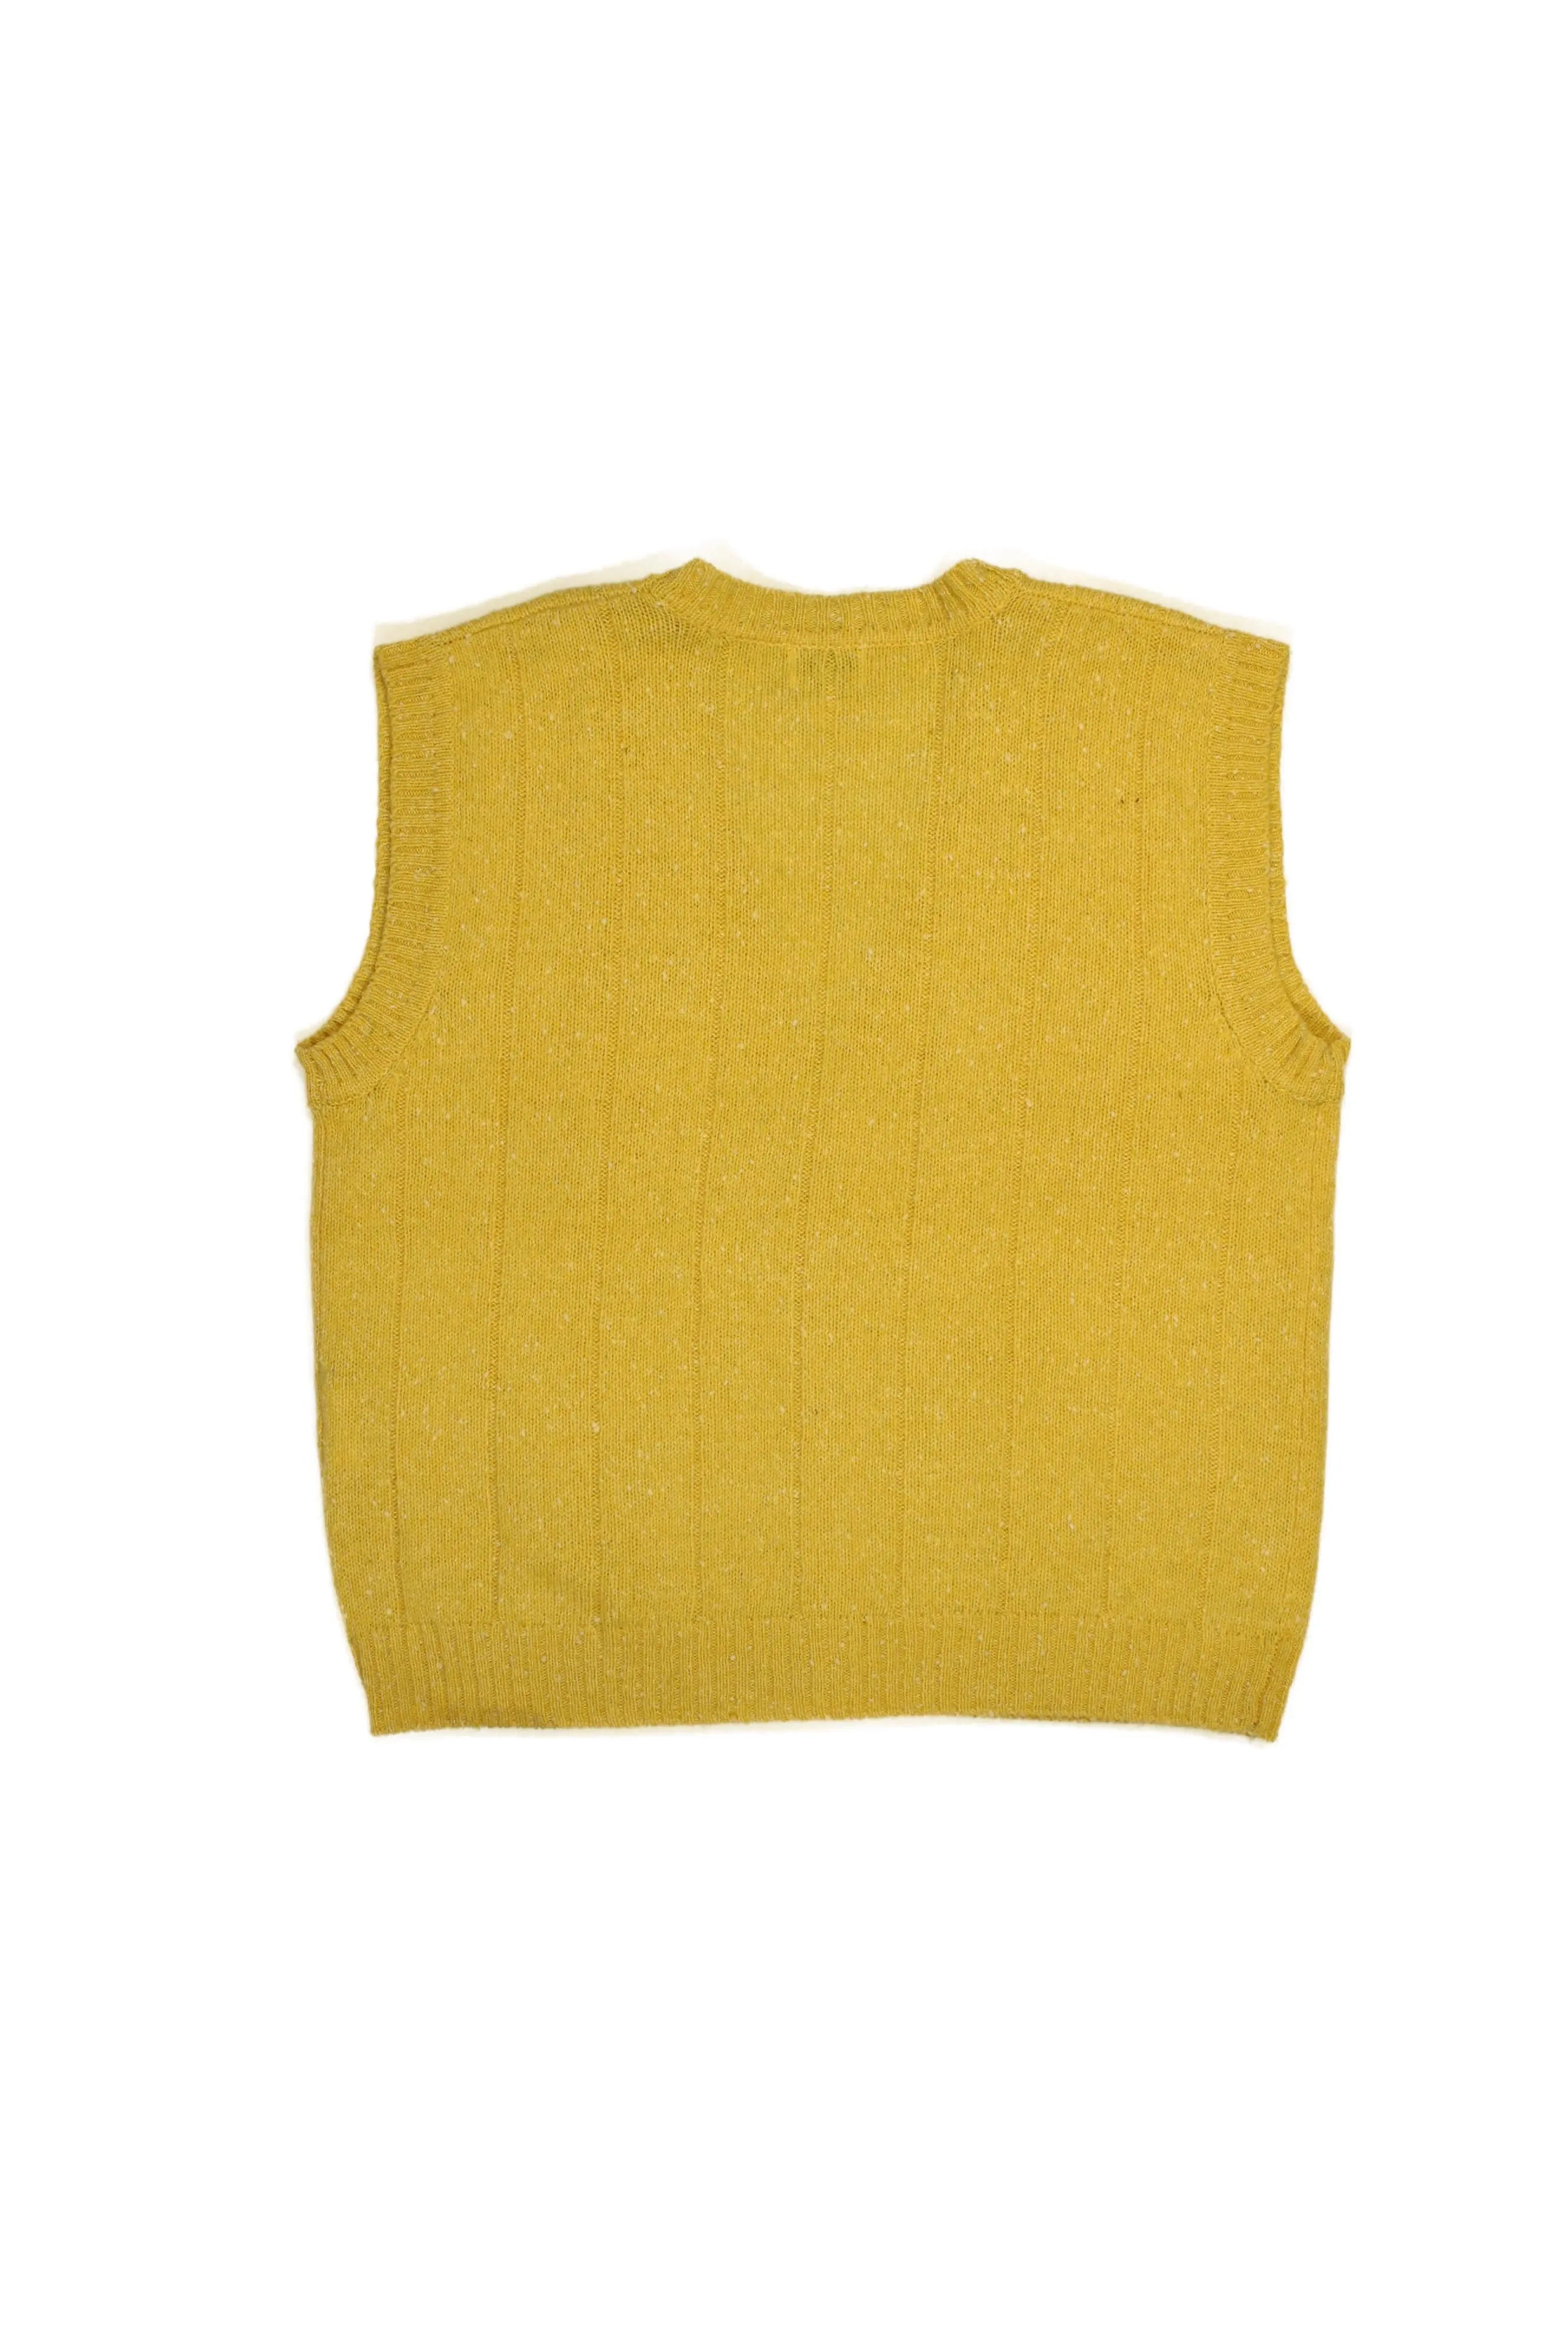 John Peel - 90s Knitted Vest- ThriftTale.com - Vintage and second handclothing